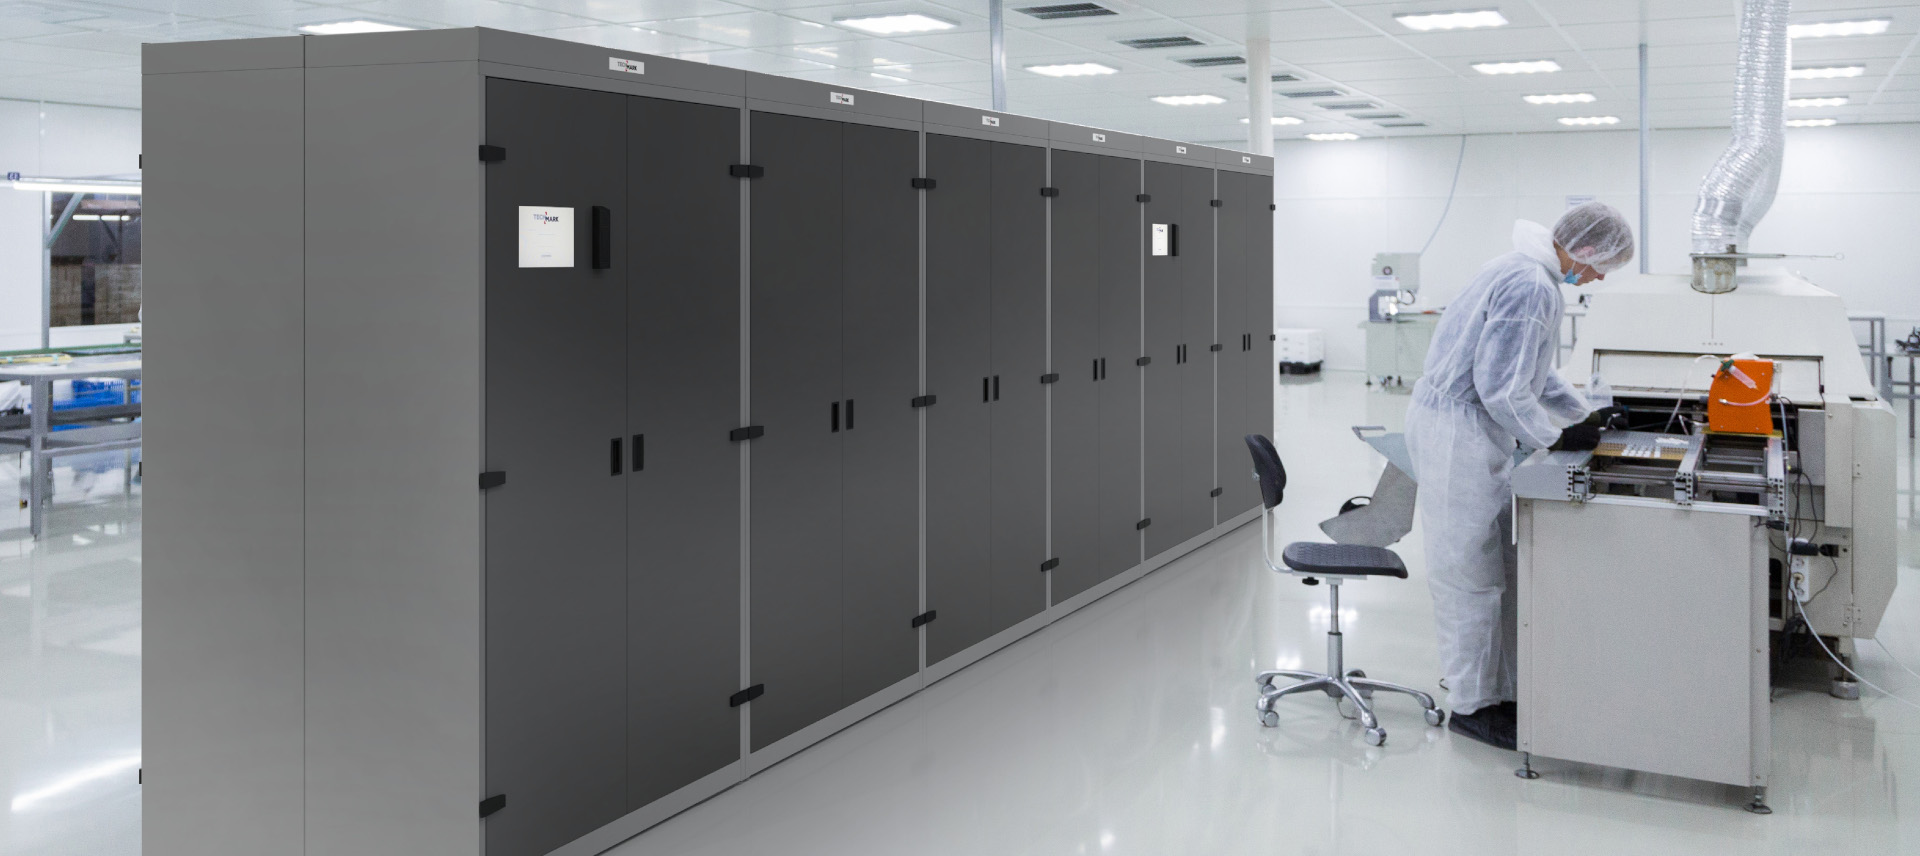 TECHCODE RFID smart office and tool cabinets prove themselves in the most demanding applications.